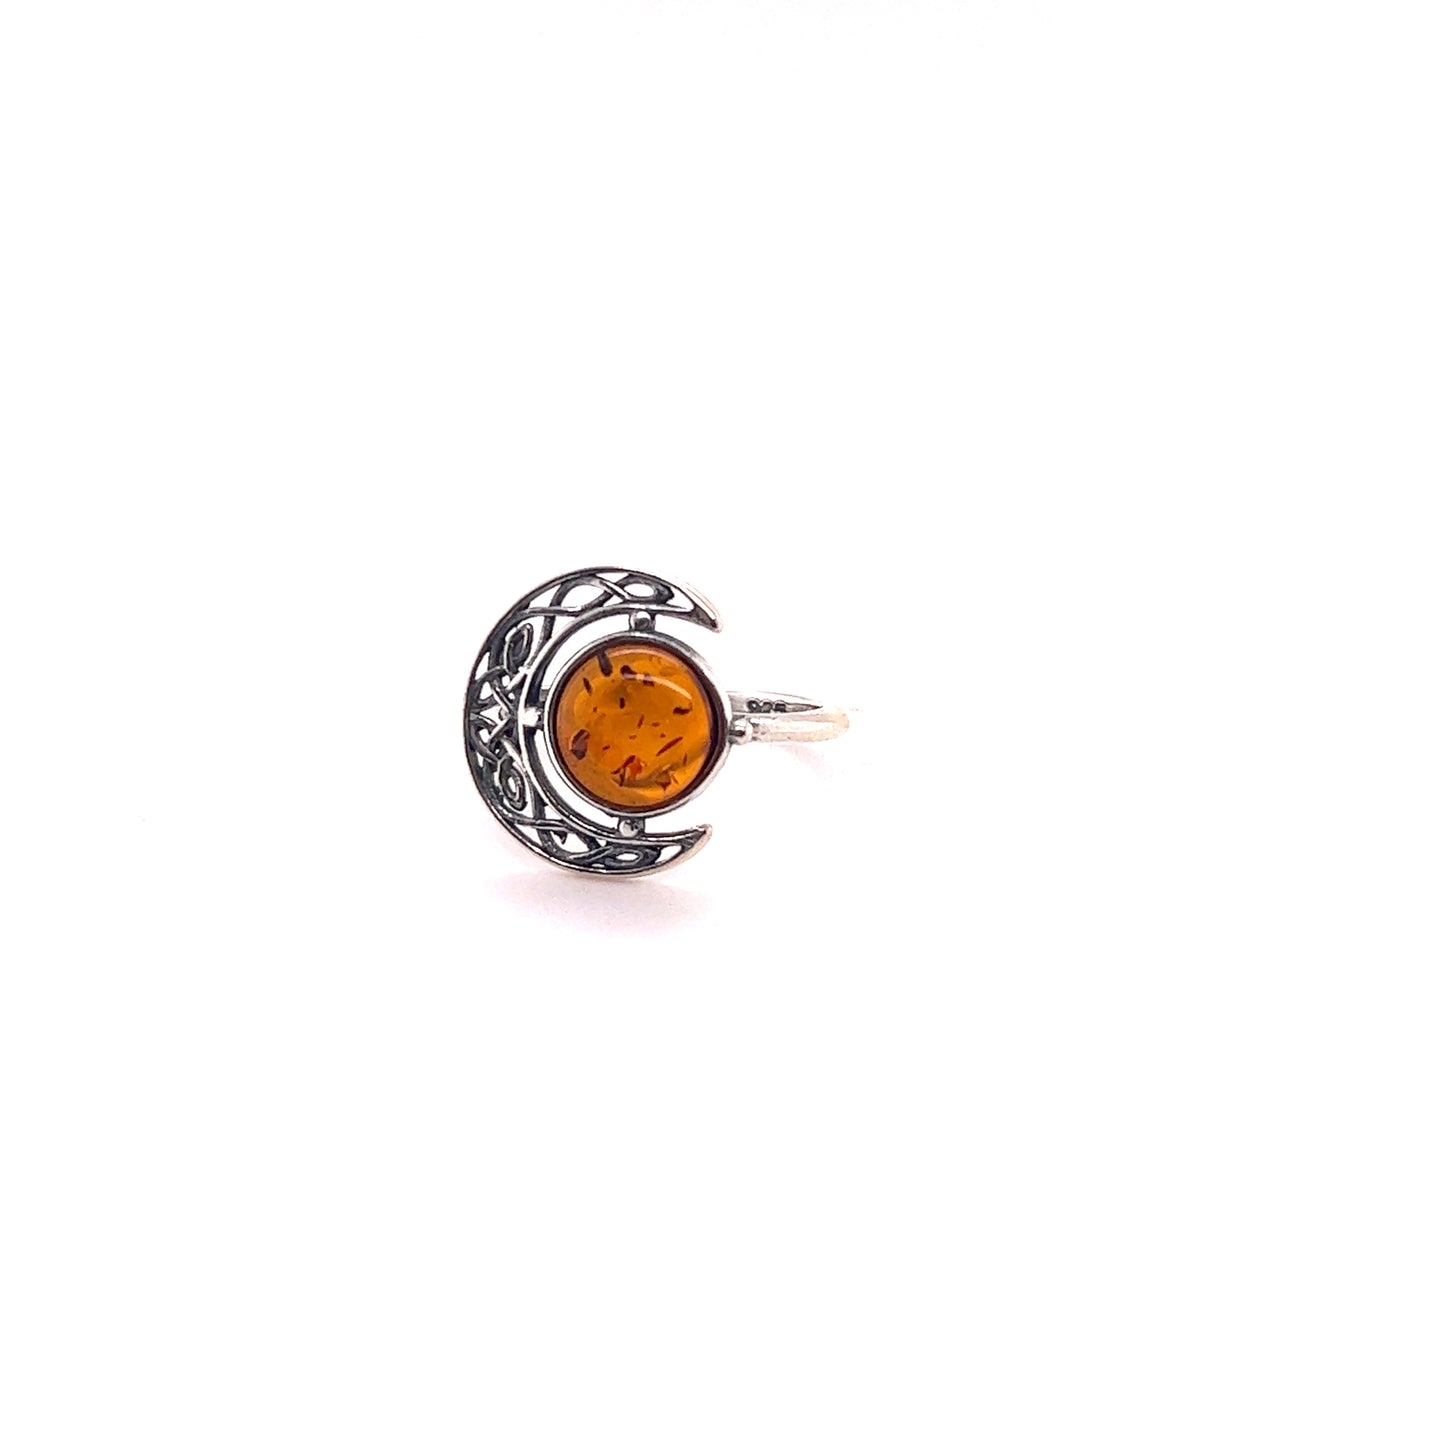 A Super Silver Celtic Amber Crescent Moon Ring, featuring a crescent moon and Baltic amber stone, reflecting the captivating beauty of moon phases.